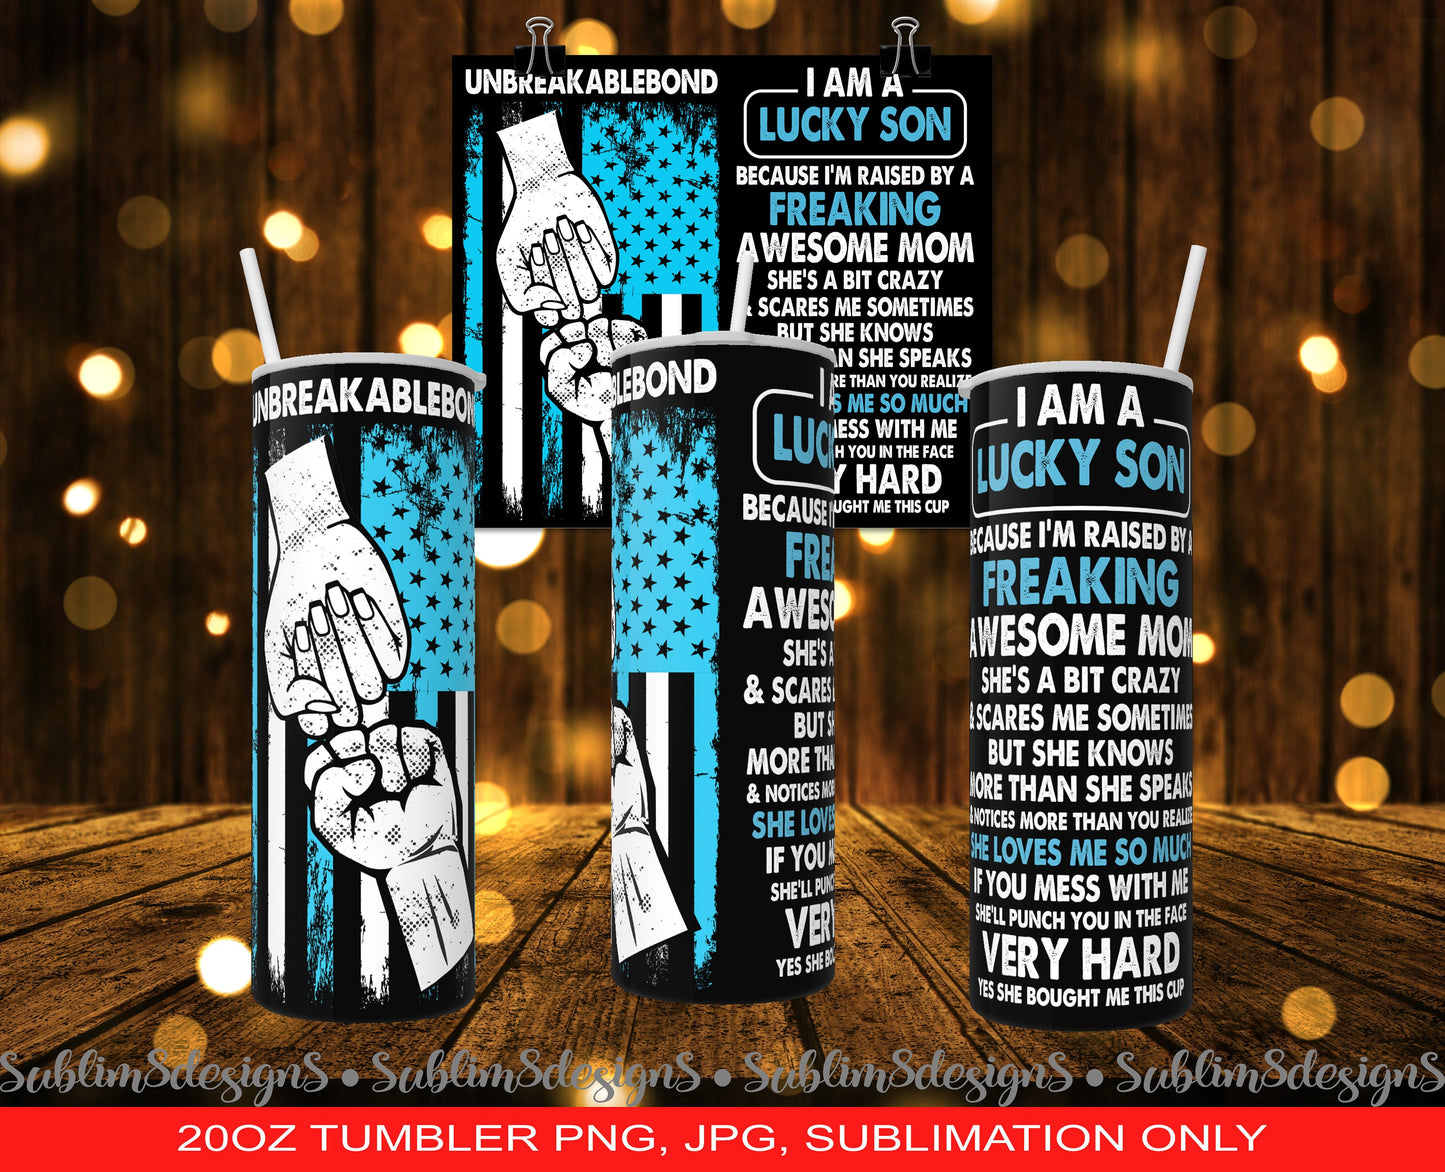 I Am A Lucky Son -  Mother's Day Gift - Perfect for the ultimate momma's boy! - Blue 20oz Tumbler Design PNG and JPG ONLY